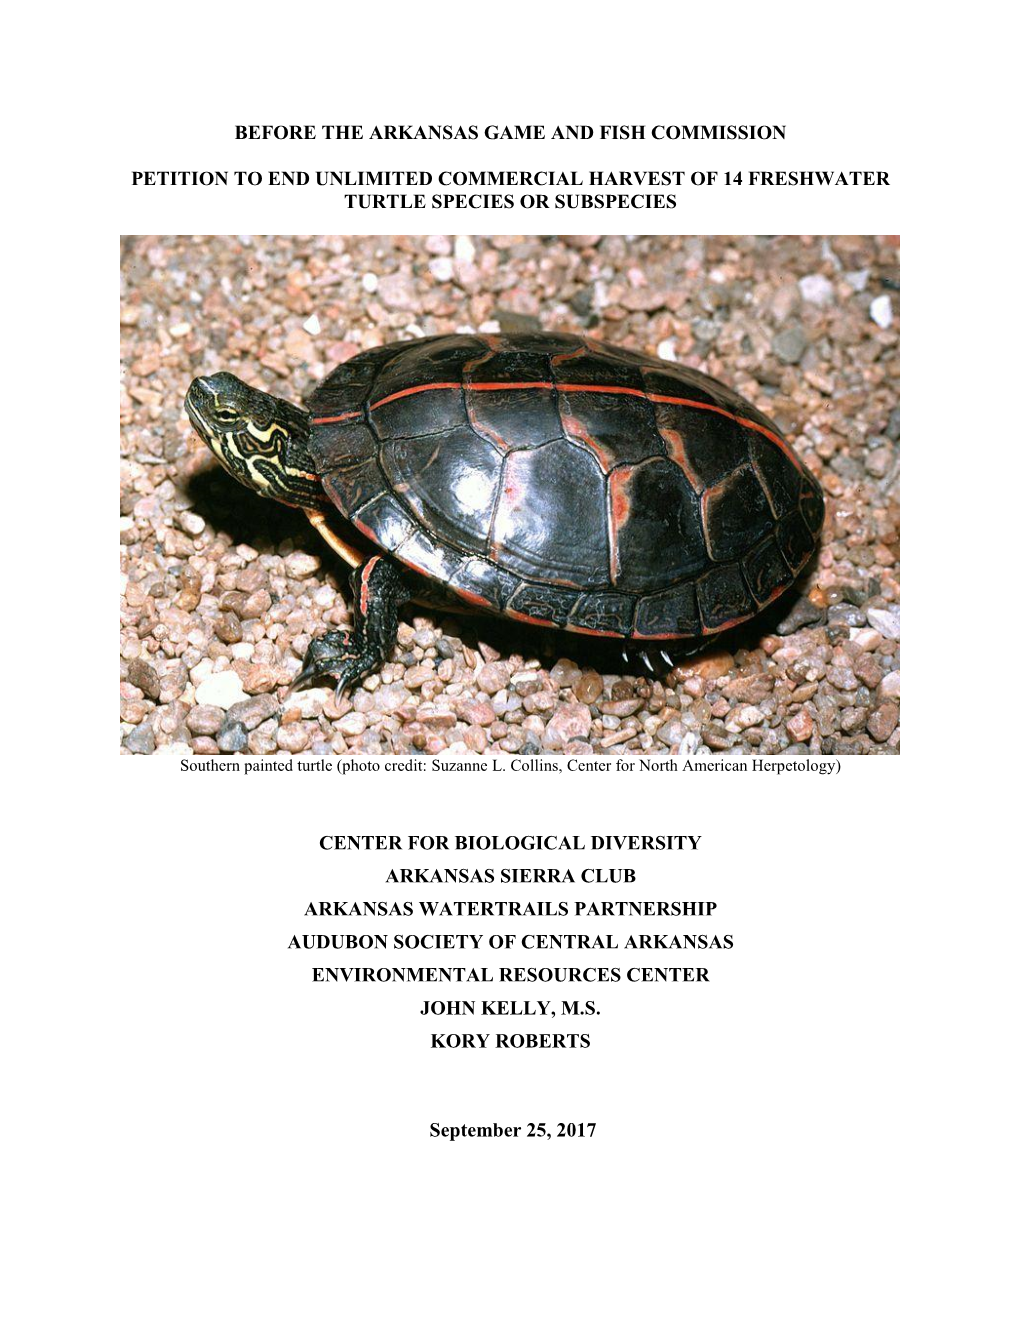 Petition to End Unlimited Commercial Harvest of 14 Freshwater Turtle Species Or Subspecies